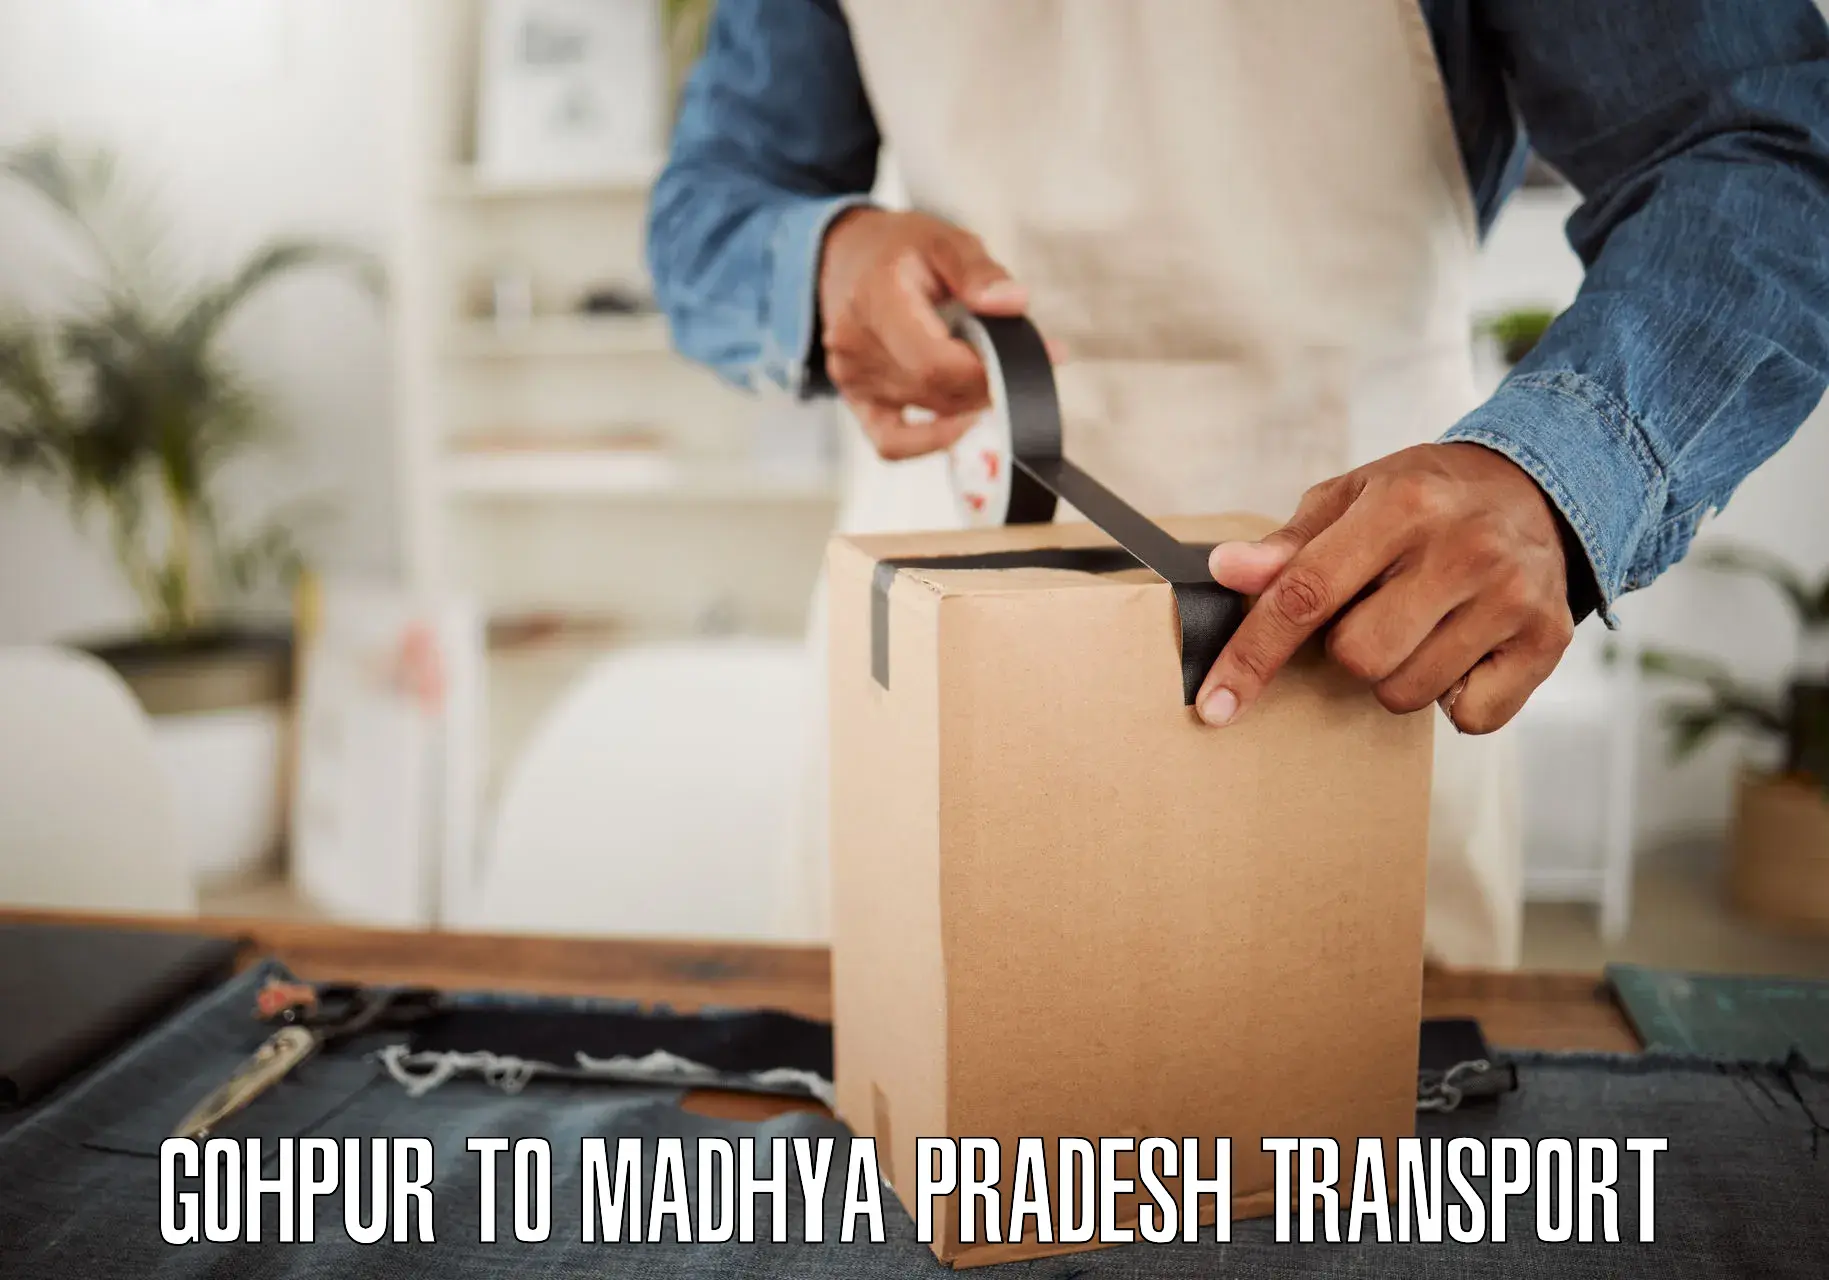 Parcel transport services in Gohpur to Gwalior